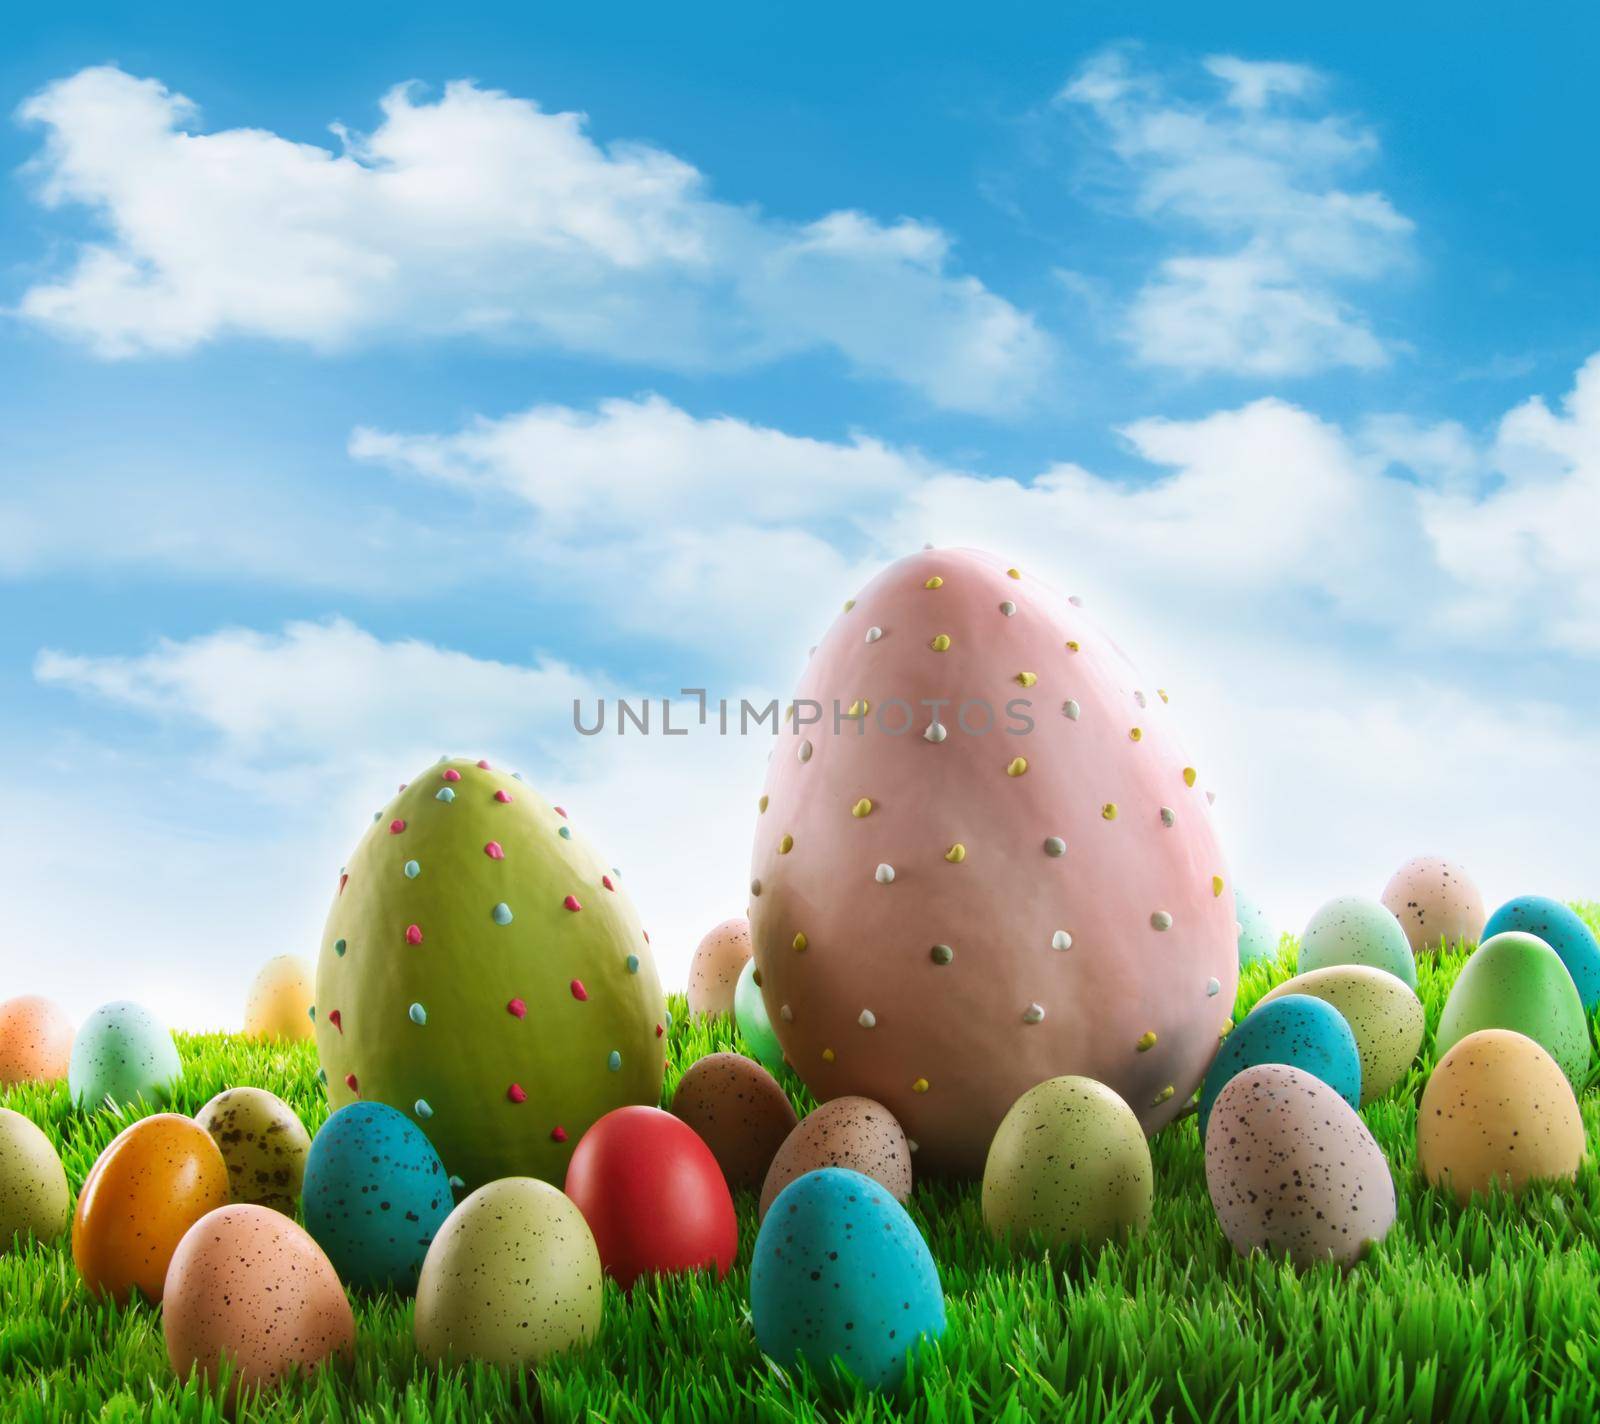 Decorated eggs in the grass by Sandralise